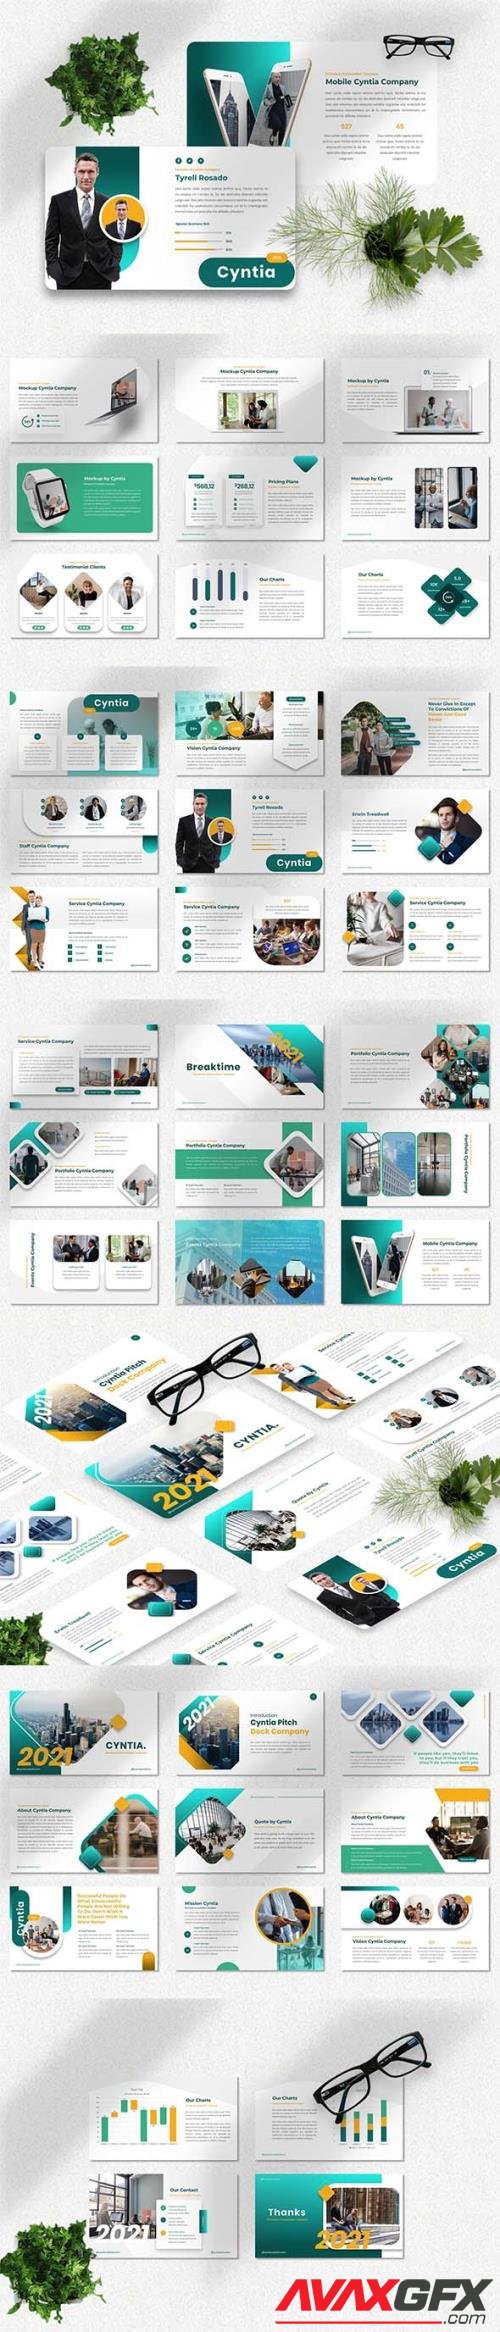 Cyntia - Pitch Deck Powerpoint Template